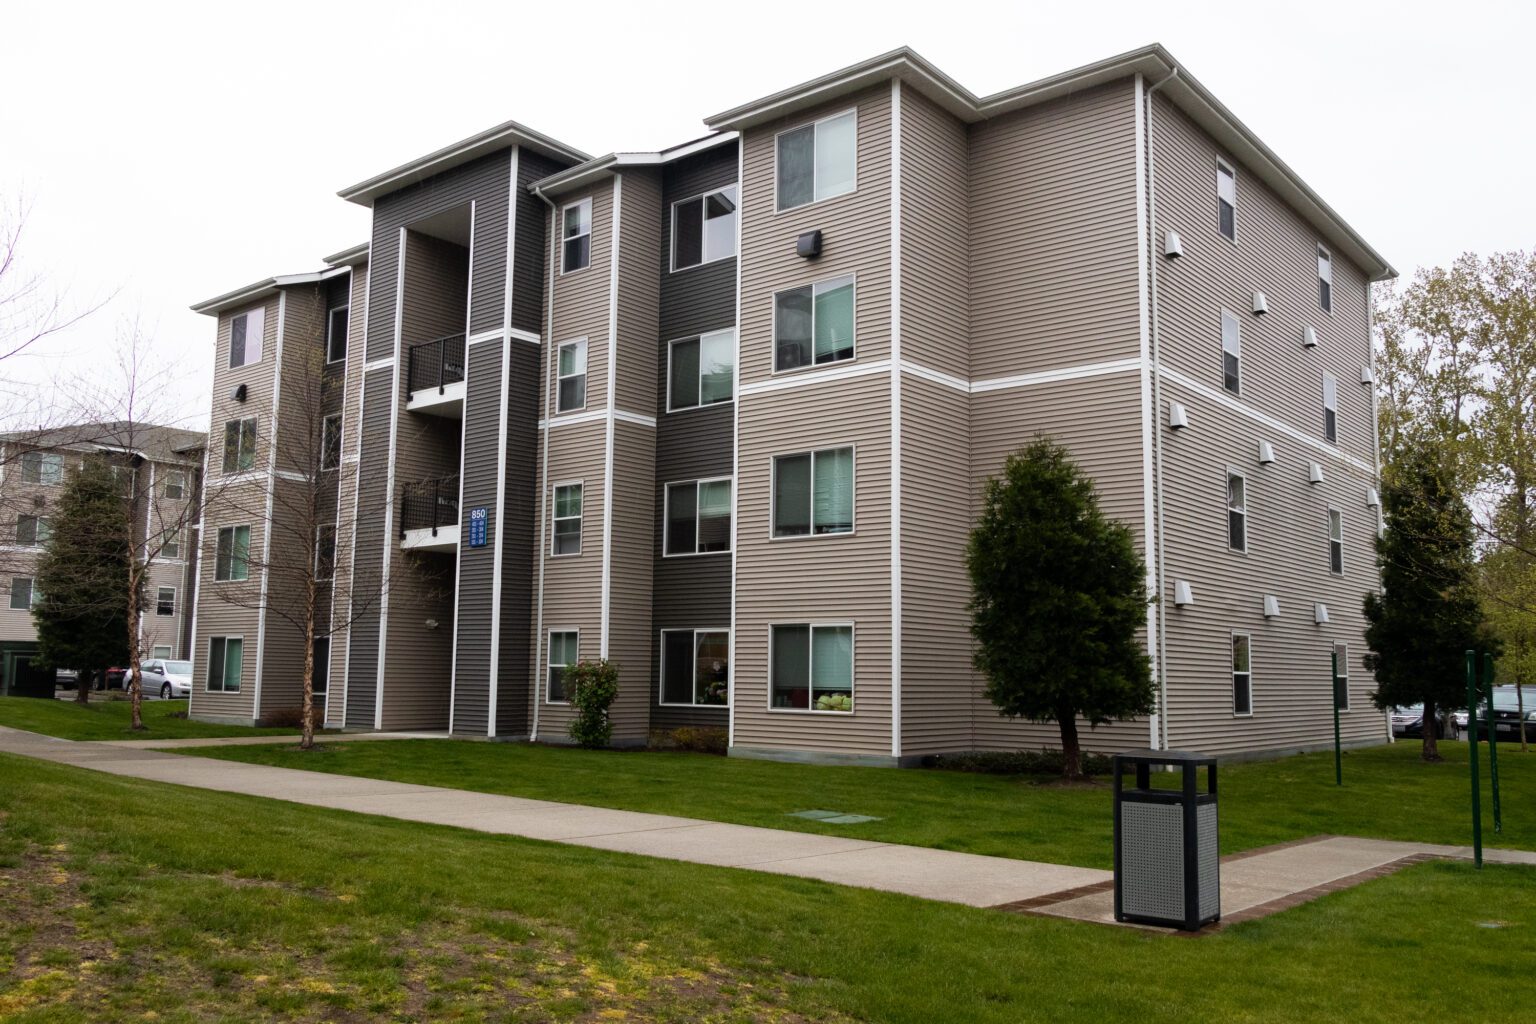 Building 850 at the Lark Bellingham apartment complex where a gun was fired during a fight on April 23.